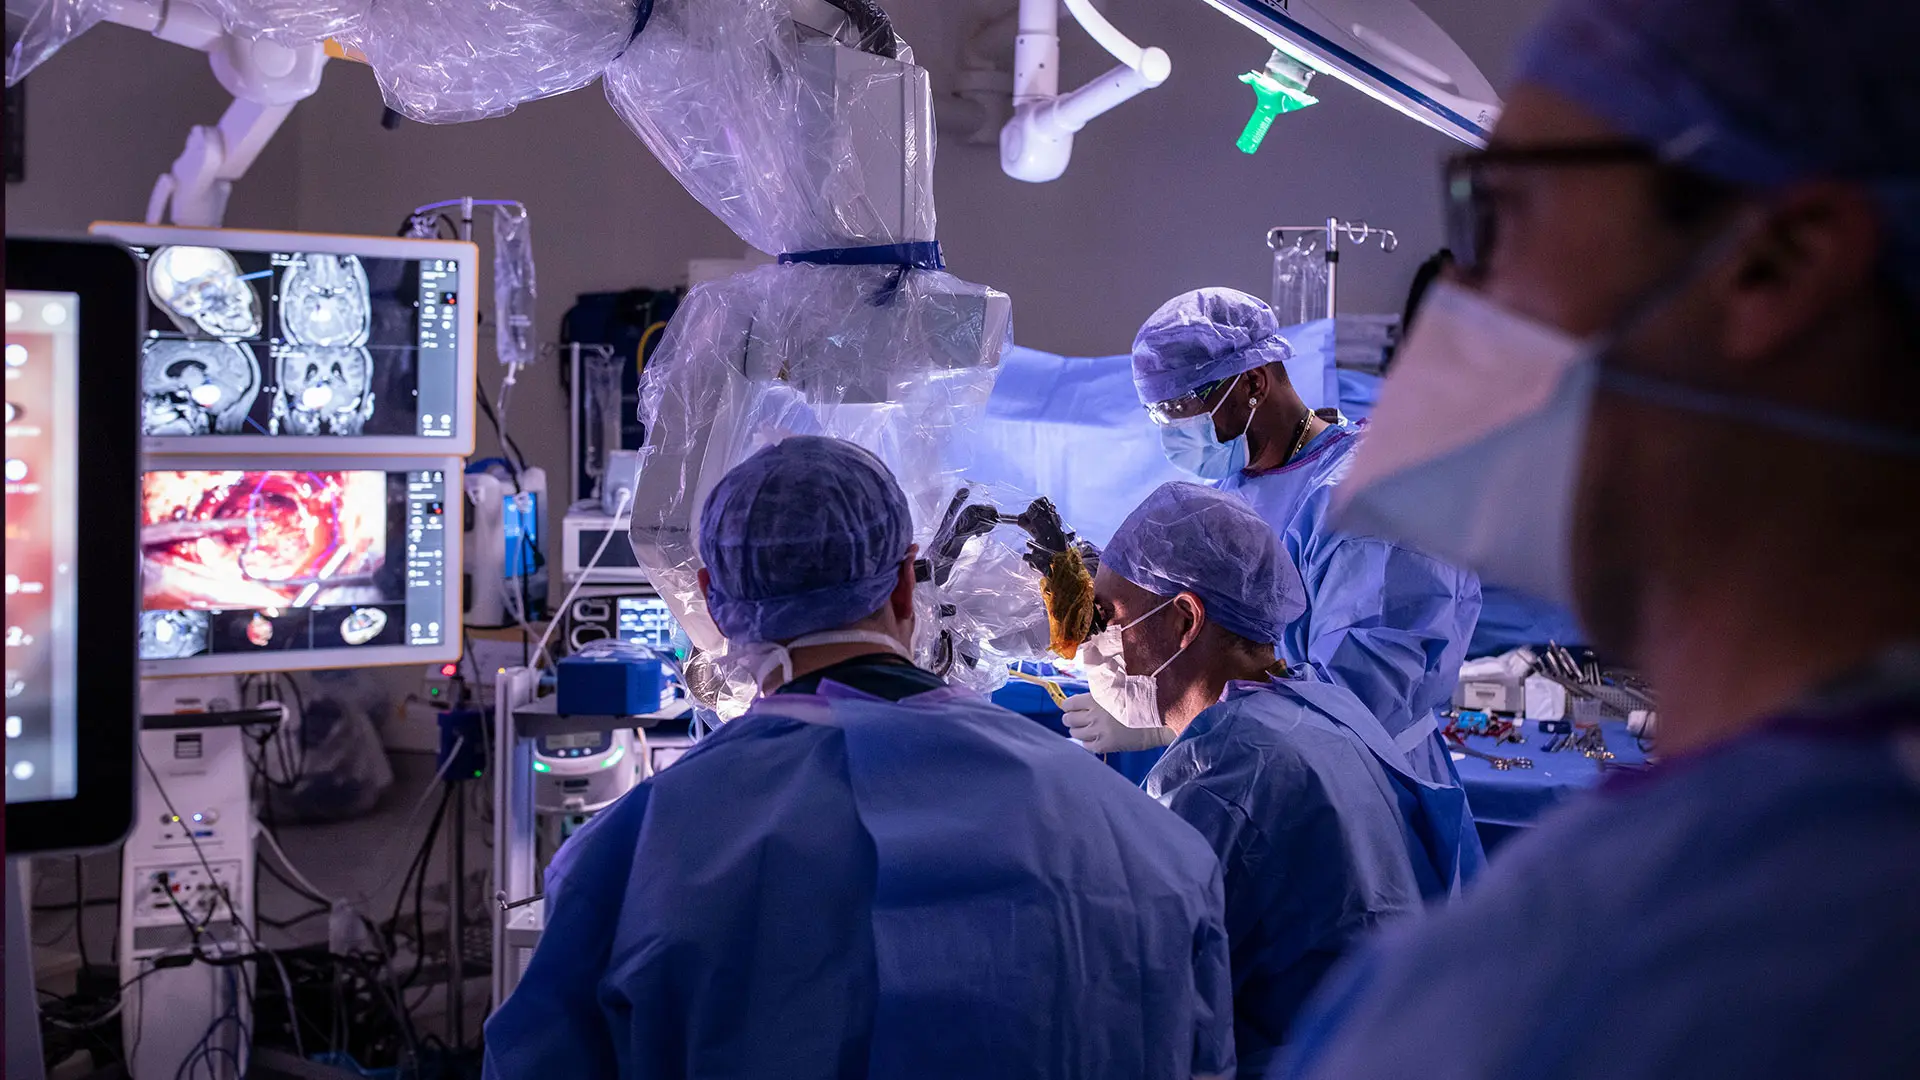 Through the use of novel technologies developed at Mount Sinai or in collaboration with industry partners, Mount Sinai’s neurosurgeons have access to progressively advanced pre-, intra-, and postoperative tools to produce better patient outcomes.